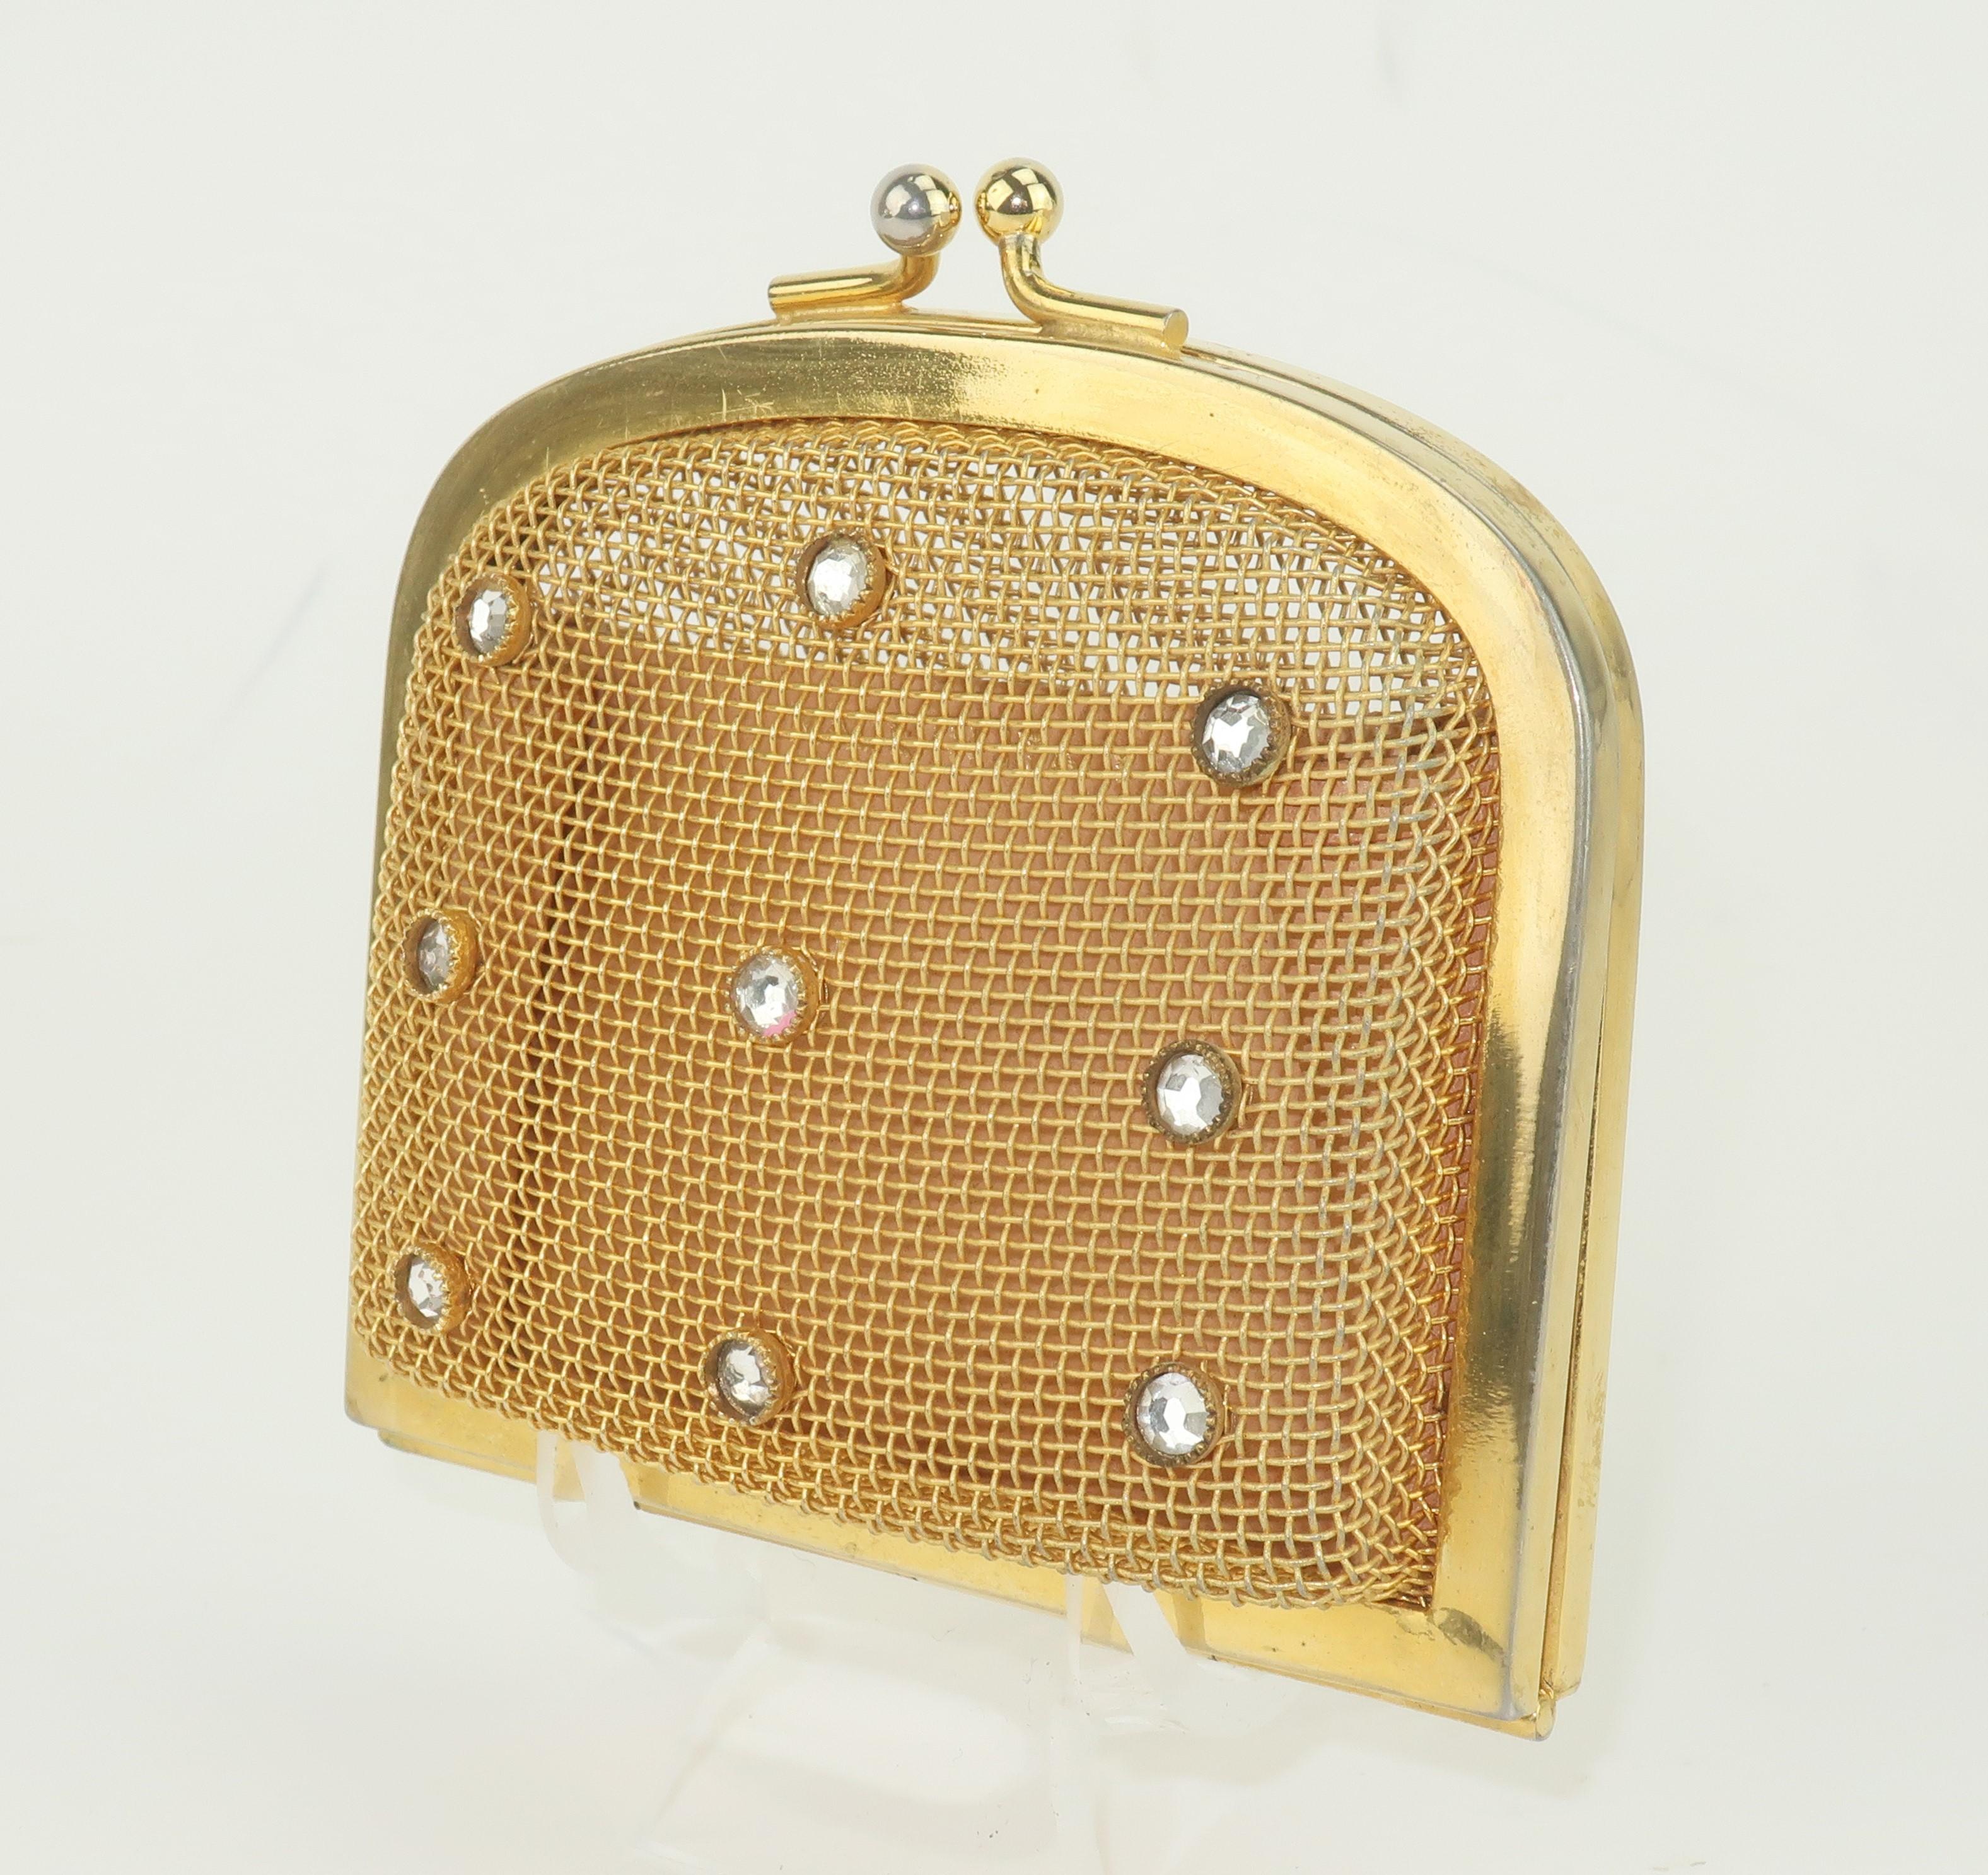 C.1980 Italian gold mesh change purse with leather divider and crystal rhinestone accents.  A fun little accessory for your favorite handbag.  Please see the Modern & Moore homepage for the red leather Valentino handbag shown as display in